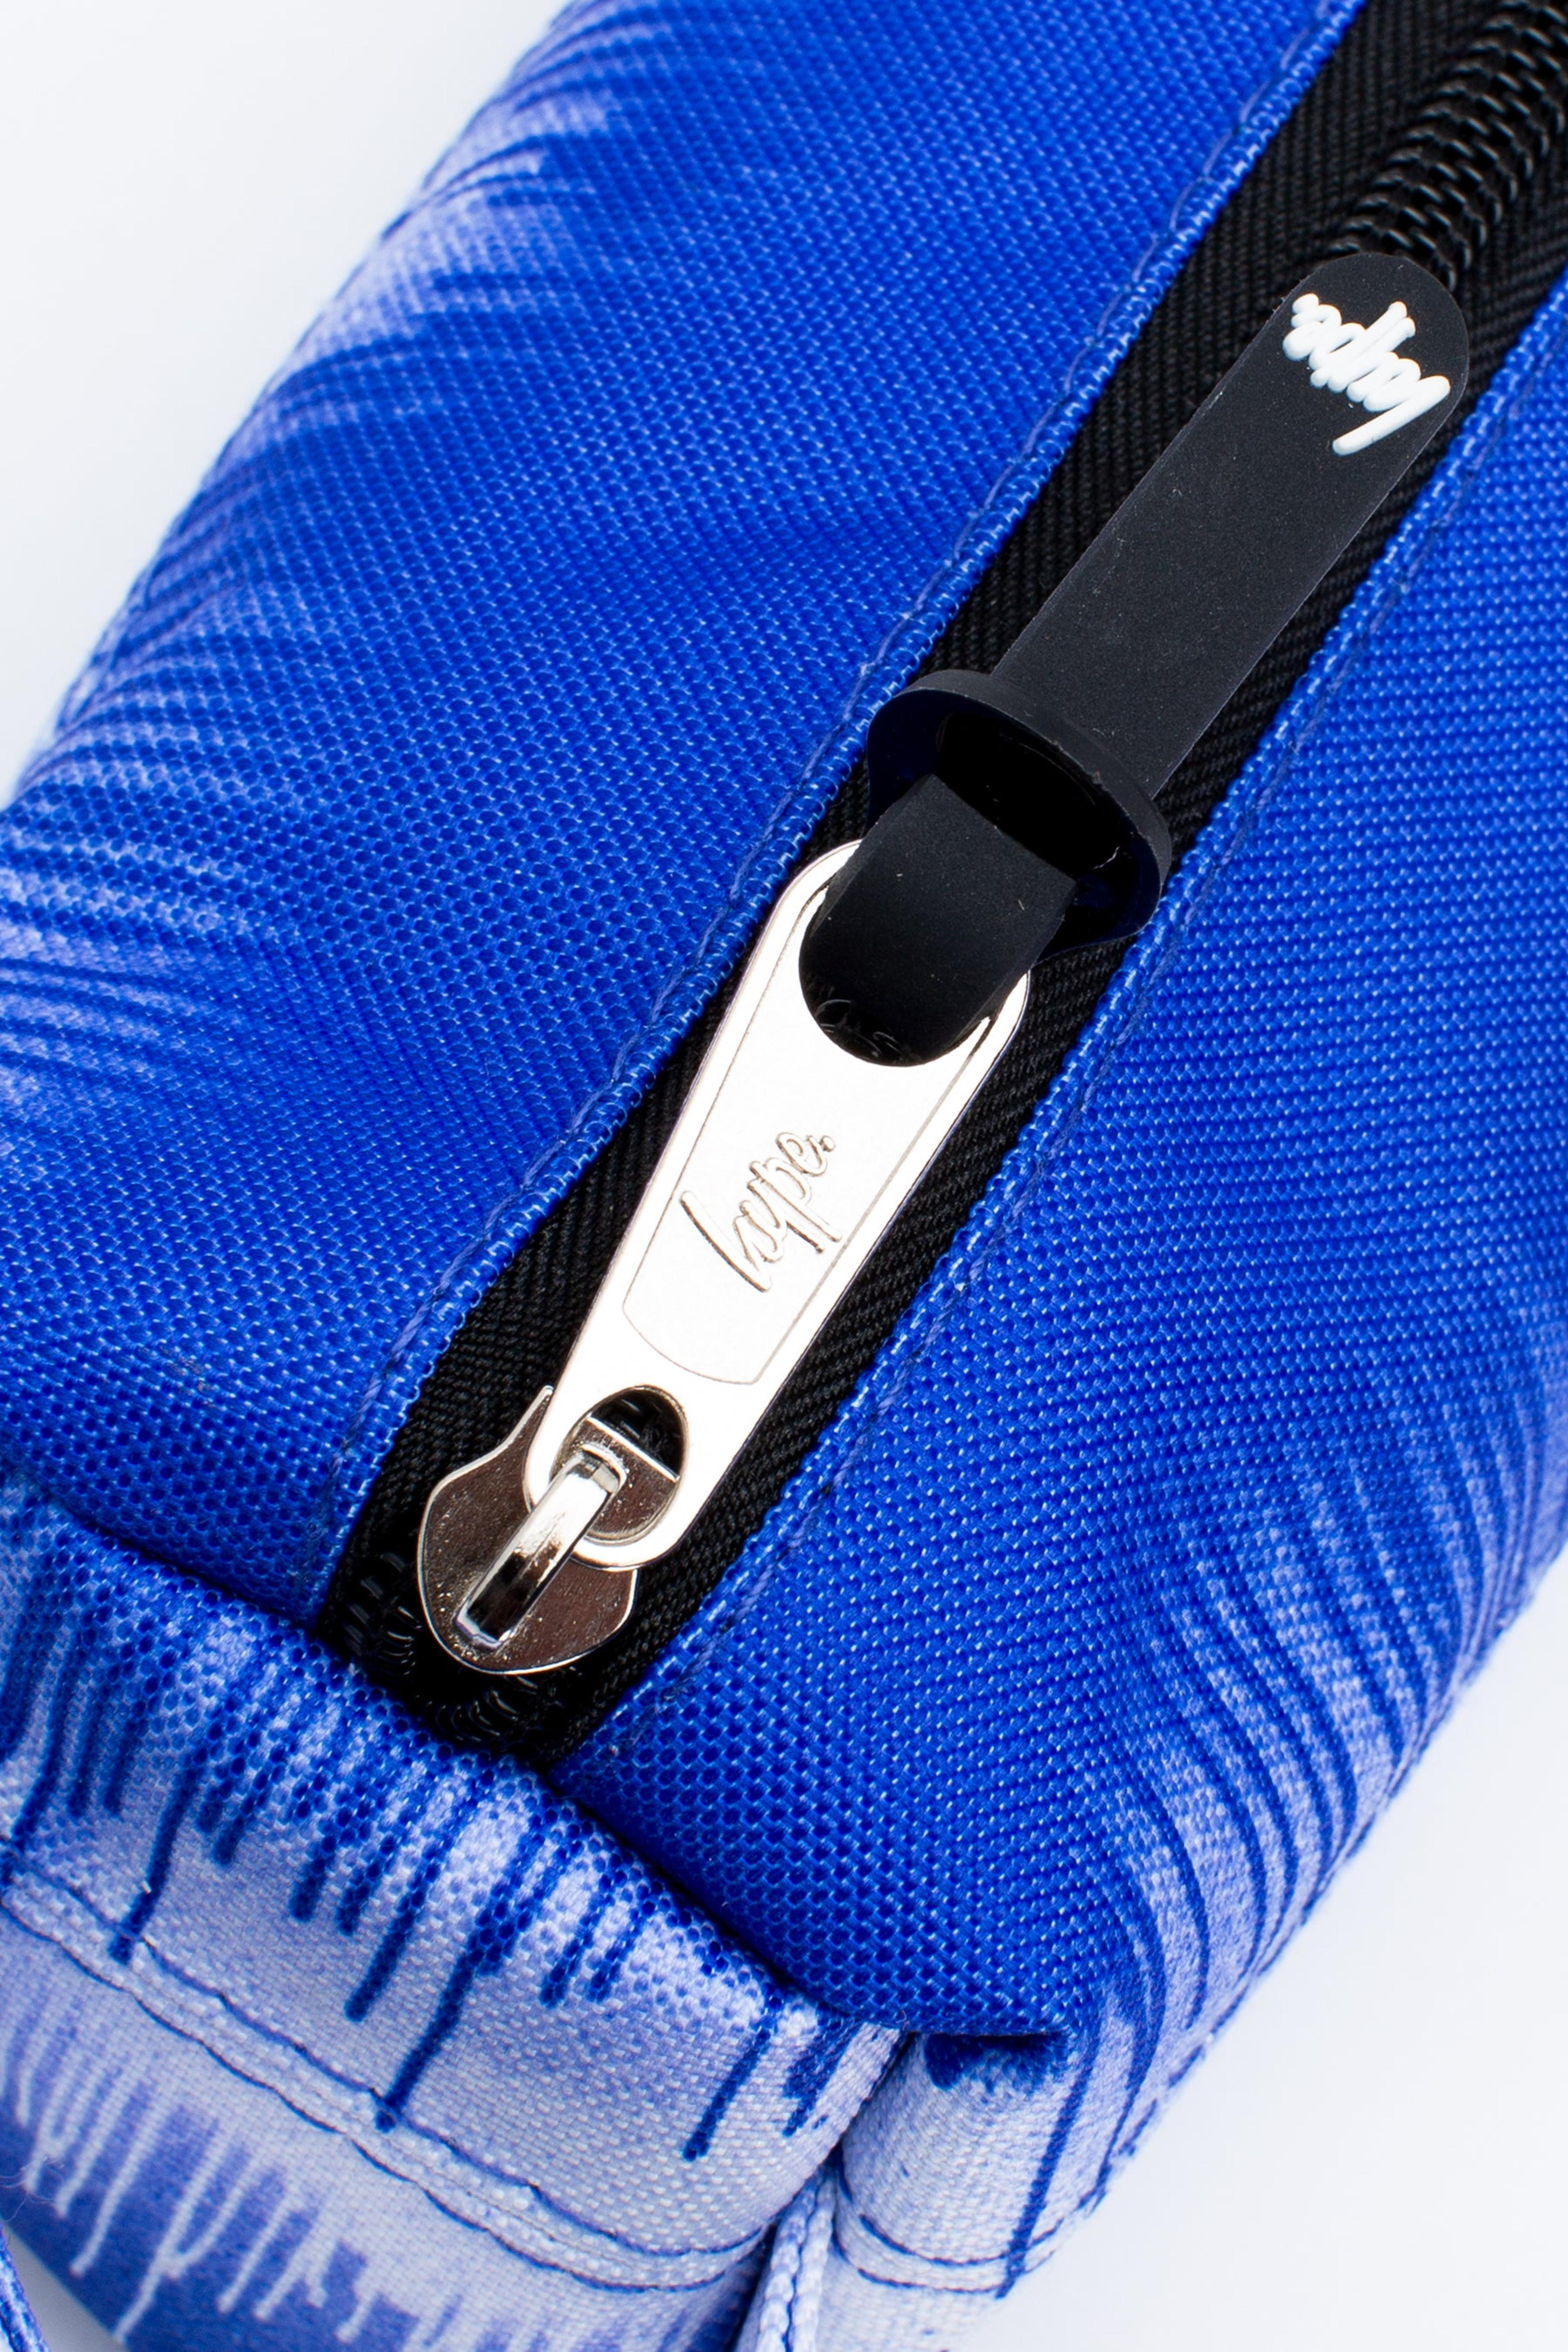 Alternate View 3 of HYPE ROYAL BLUE SINGLE DRIP PENCIL CASE